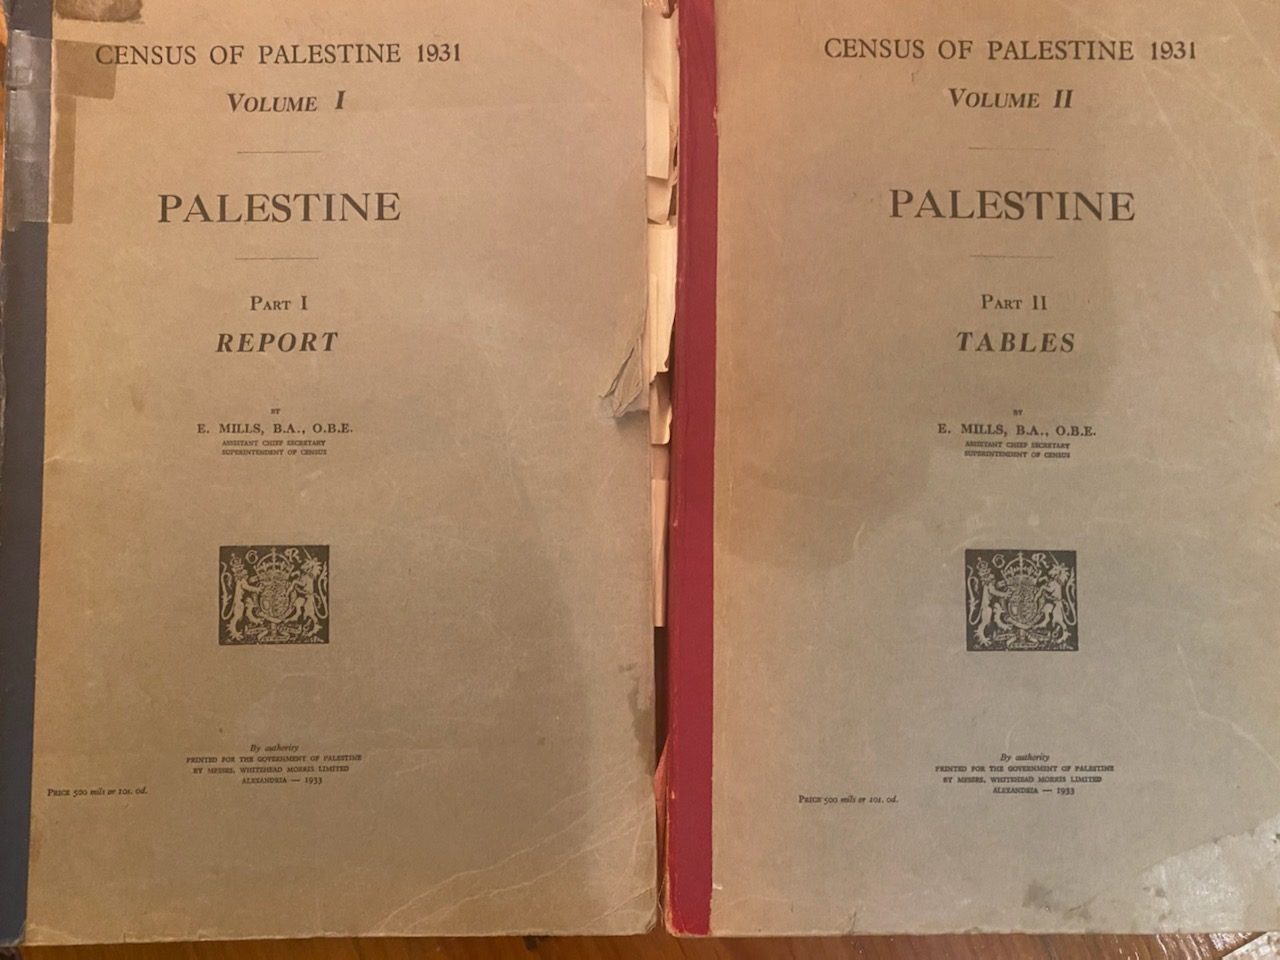 The Census of Palestine, 1931 – An Invaluable Glimpse at Palestine’s Population: Gaping Socio-Economic Distances and Differences between Muslims, Christians, and Jews